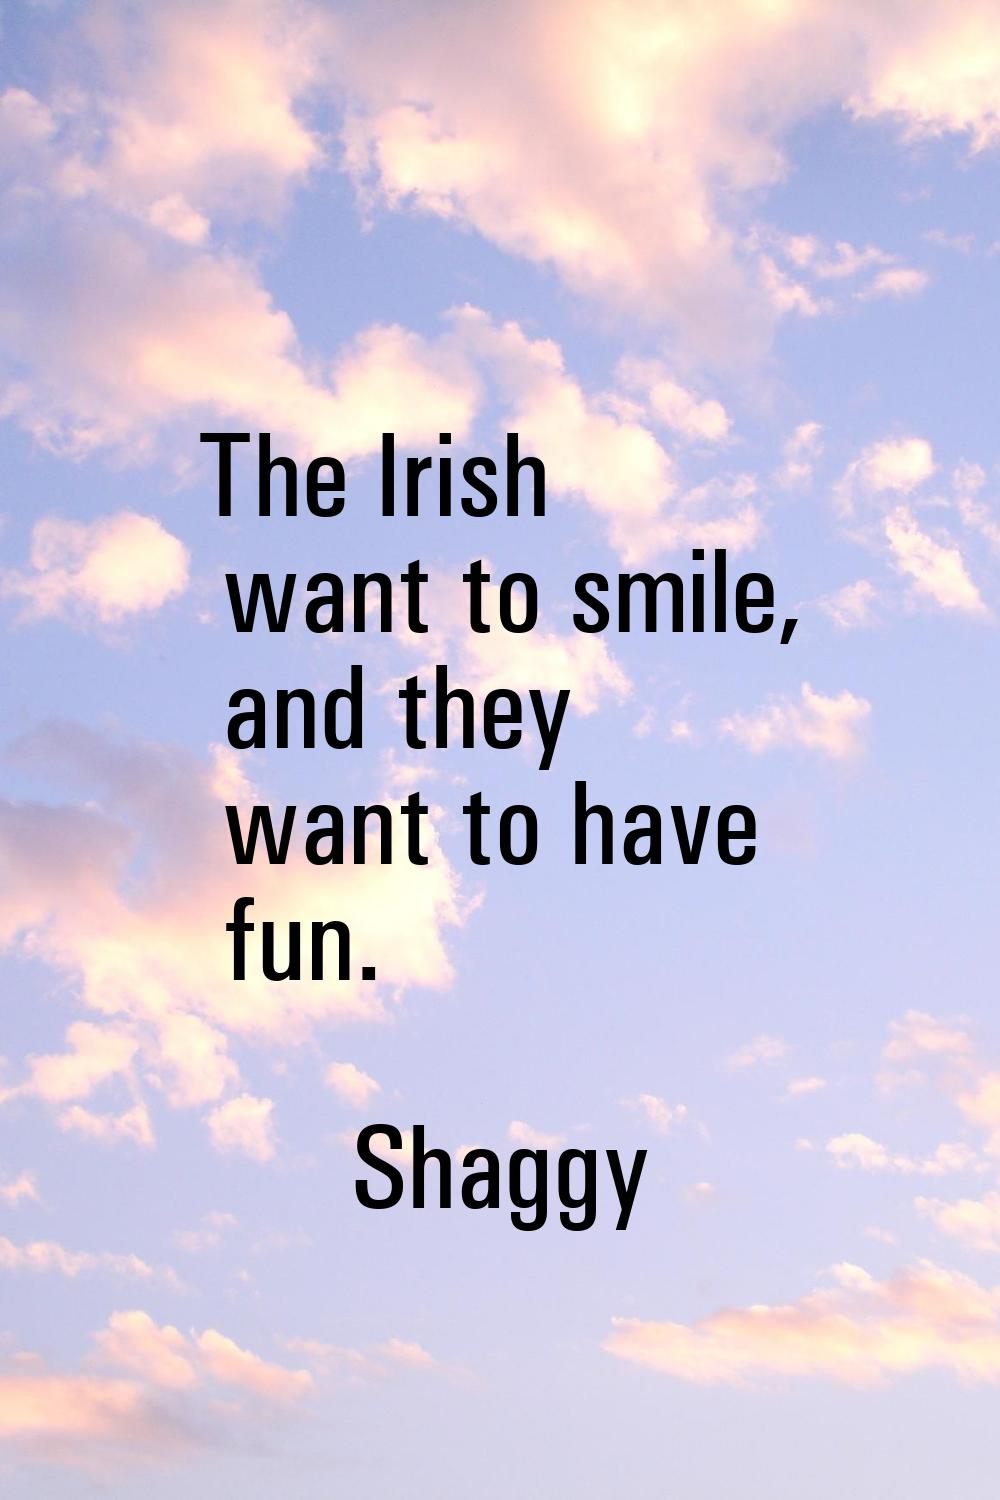 The Irish want to smile, and they want to have fun.